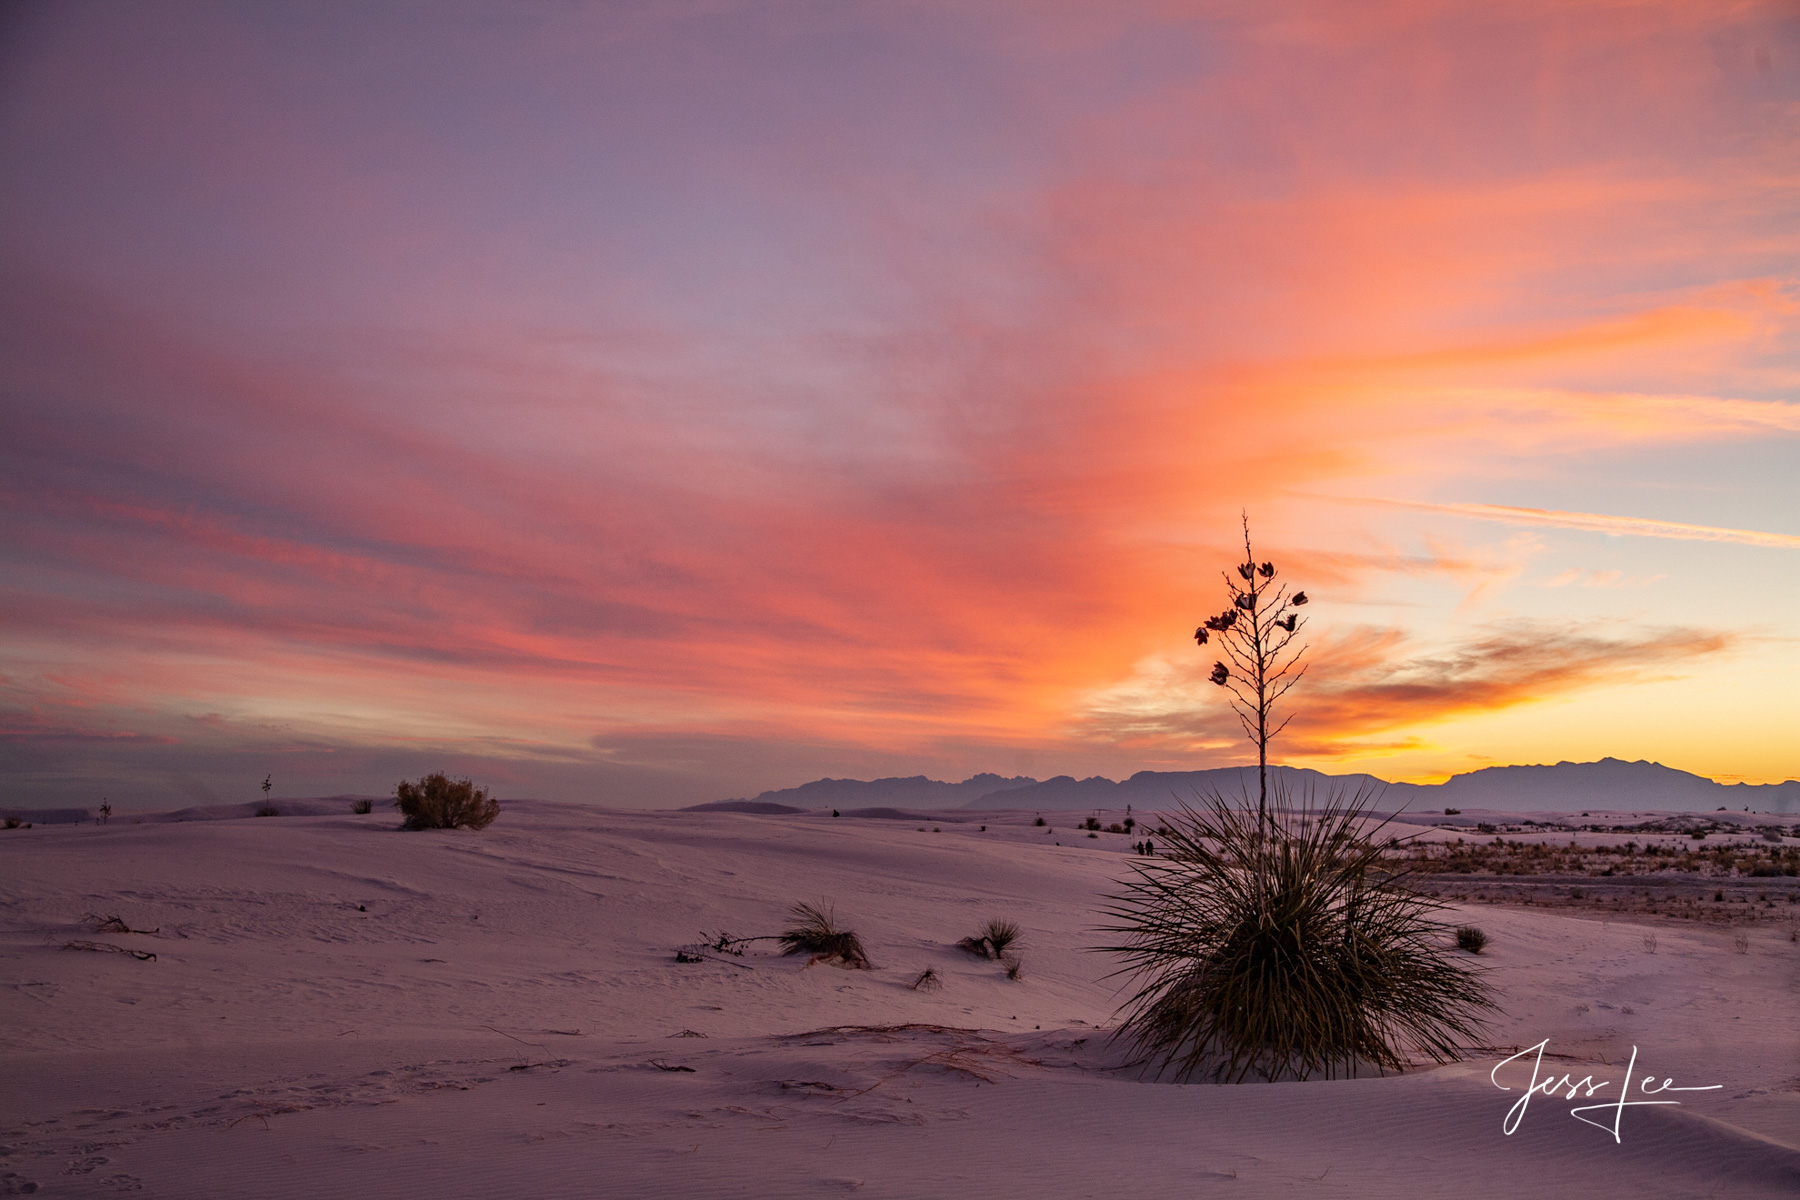 Limited Edition of 50 Exclusive high-resolution Museum Quality Fine Art Prints of Desert sunrise. Photos copyright © Jess Lee...